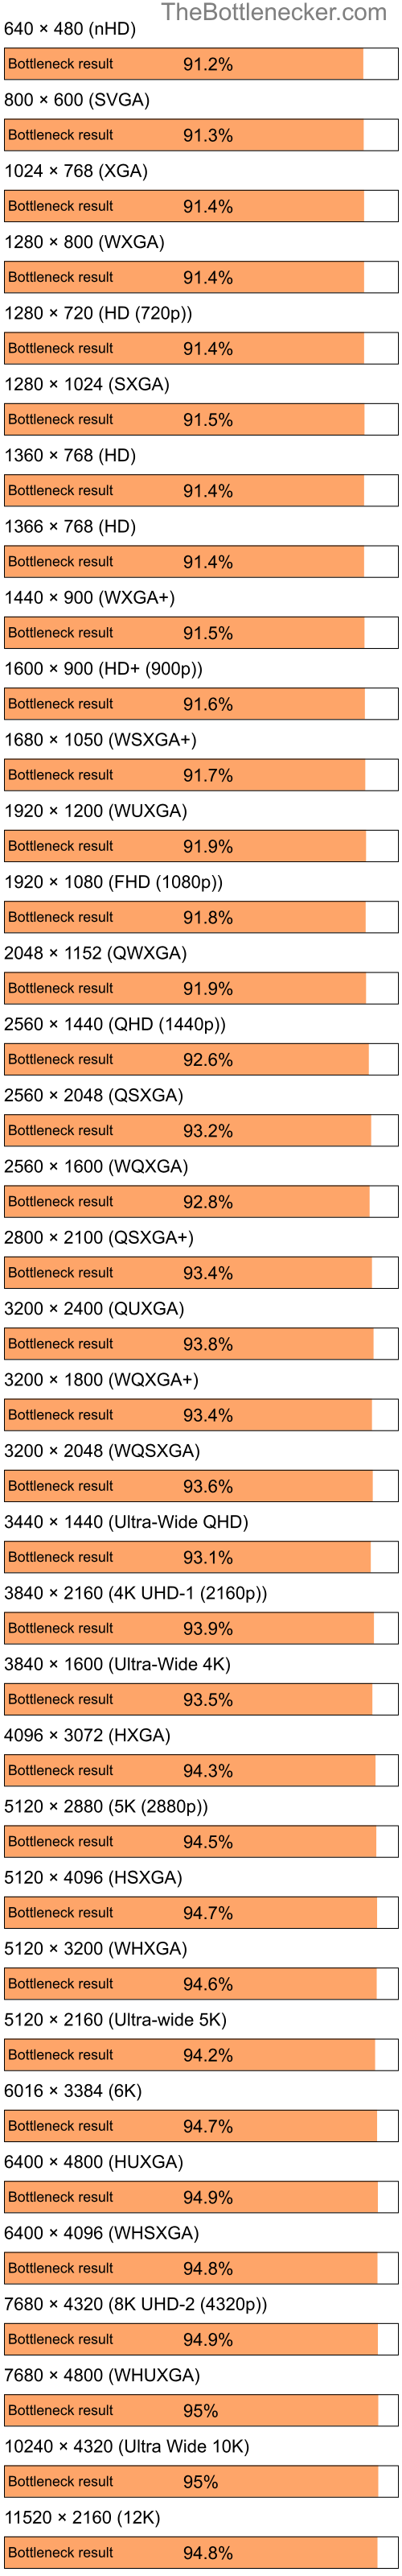 Bottleneck results by resolution for Intel Pentium 4 and AMD Radeon 9200 in Graphic Card Intense Tasks